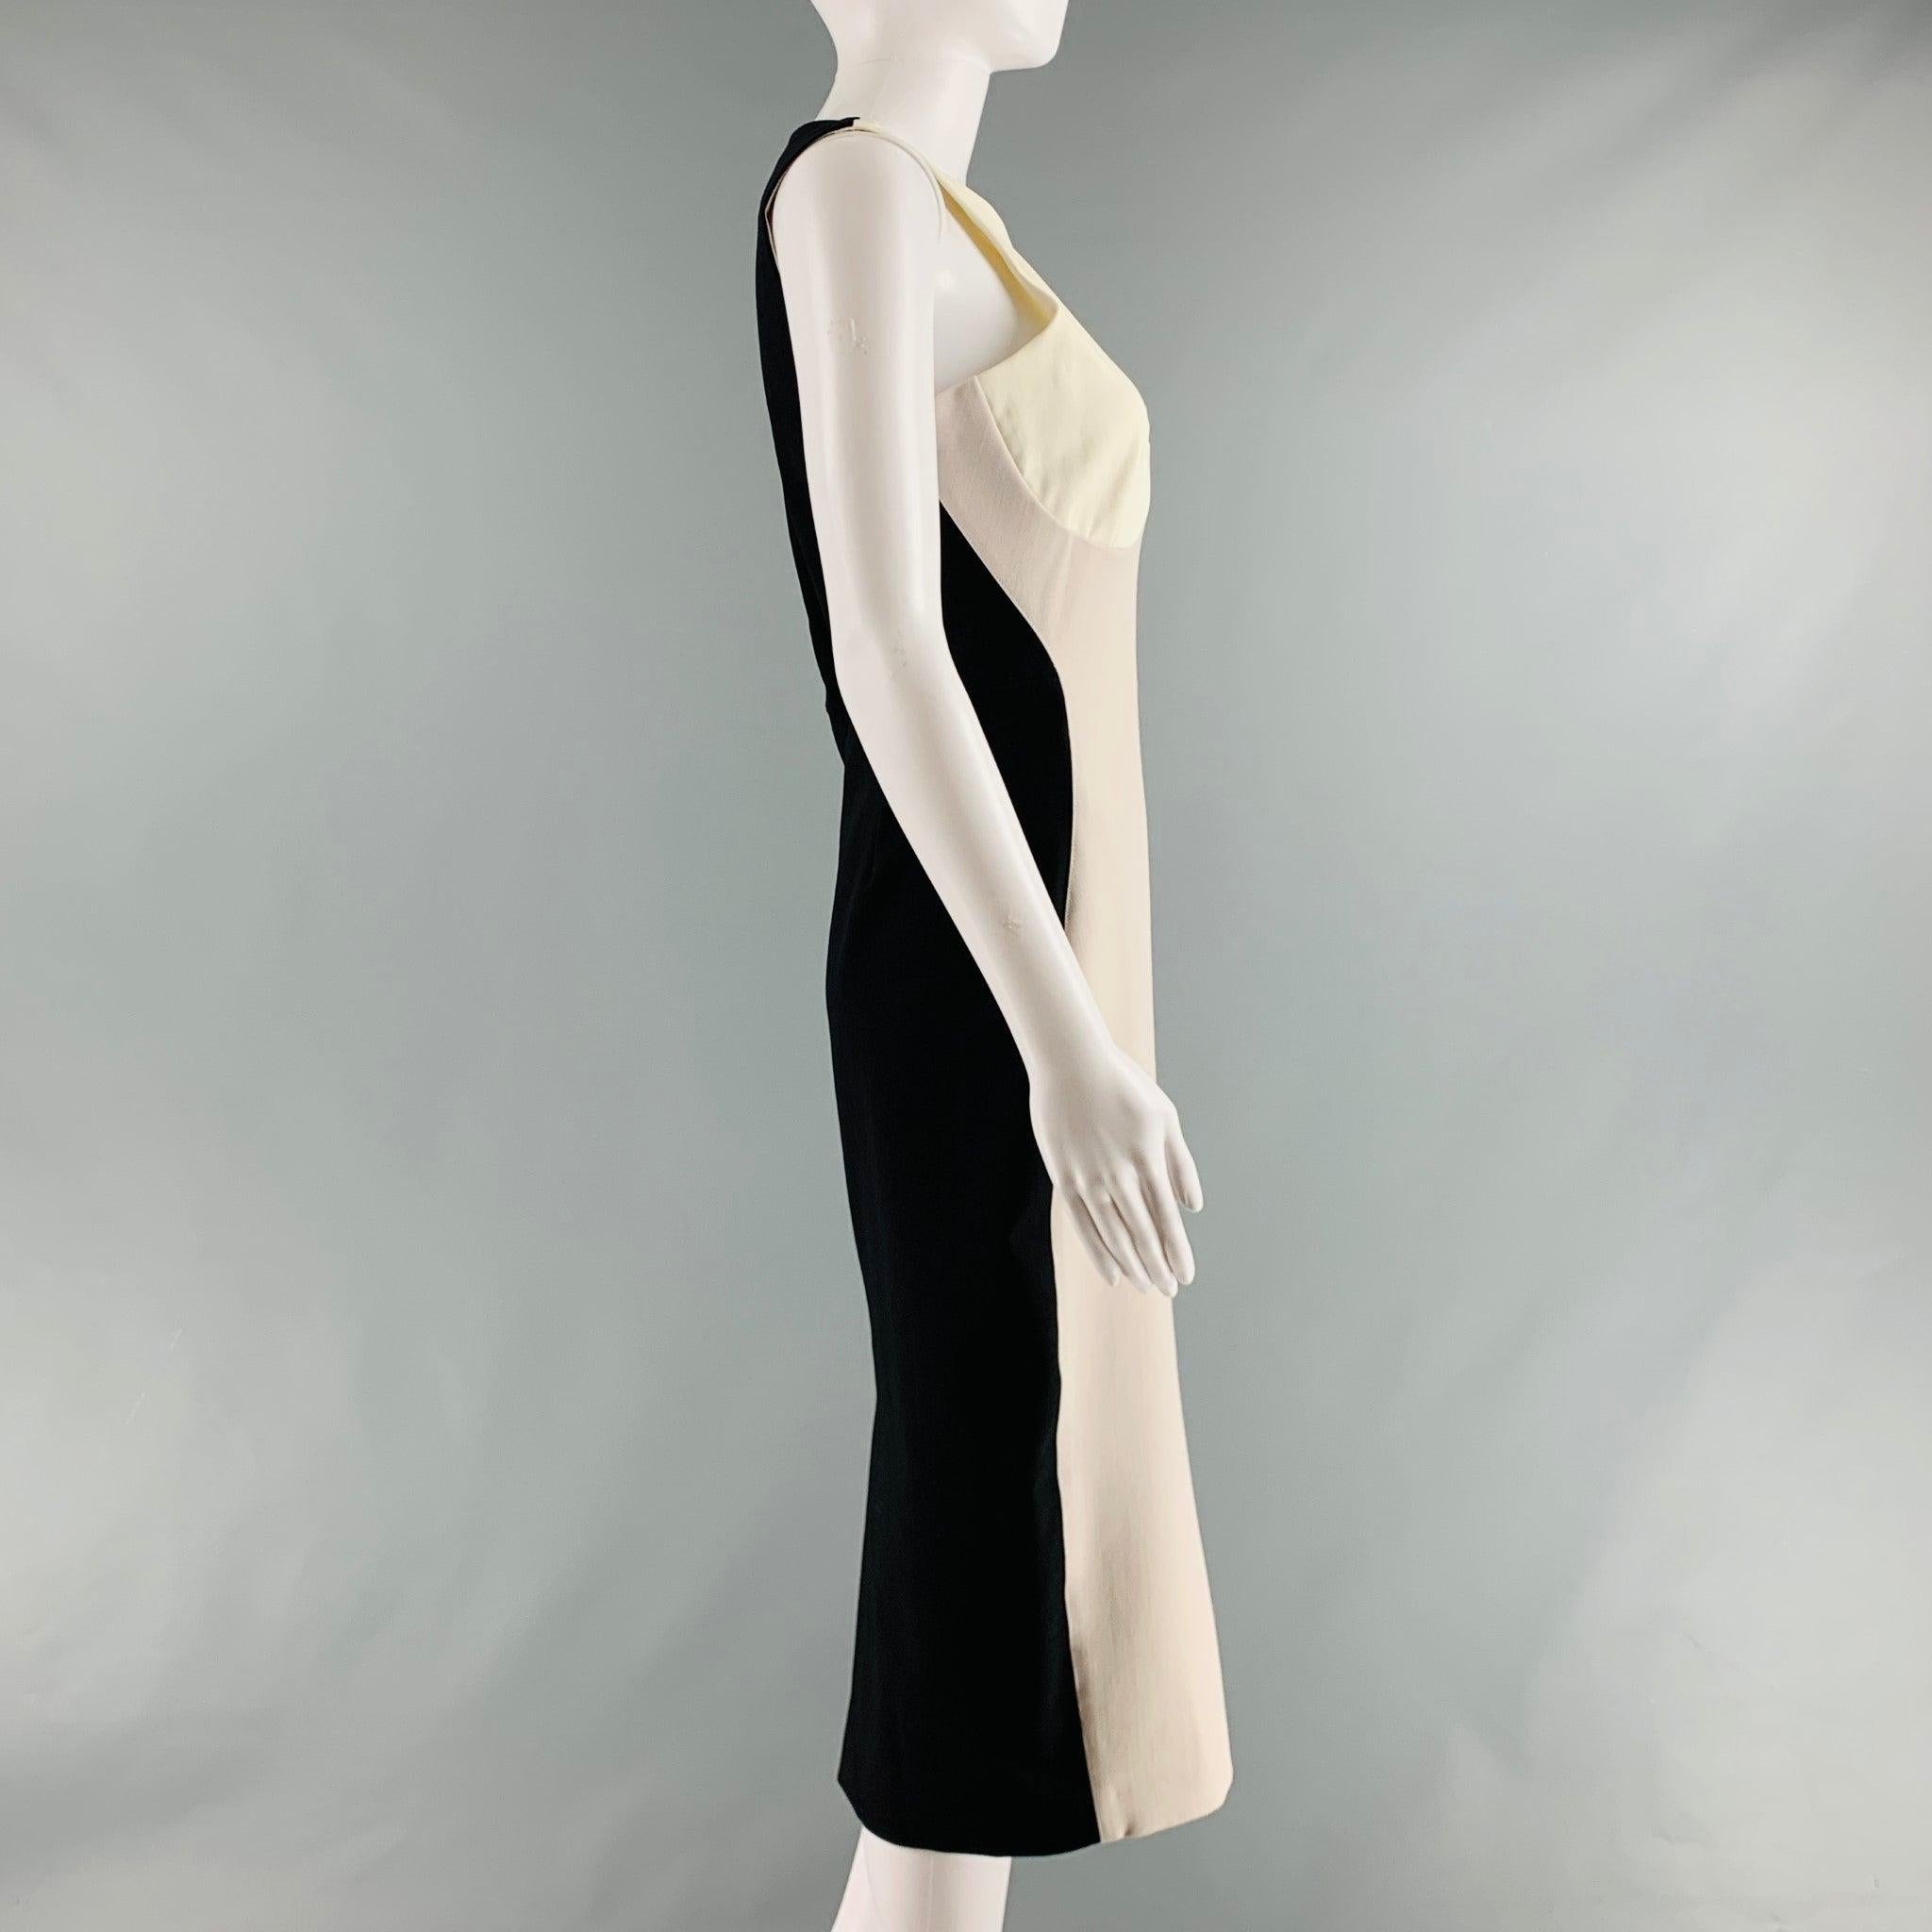 STELLA McCARTNEY 2011 midi dress comes in a black, beige and off white polyamide and elastane knit material featuring a contrast panels, back slit, body con style, and a back zip up closure. Excellent Pre-Owned Condition. 

Marked:   6